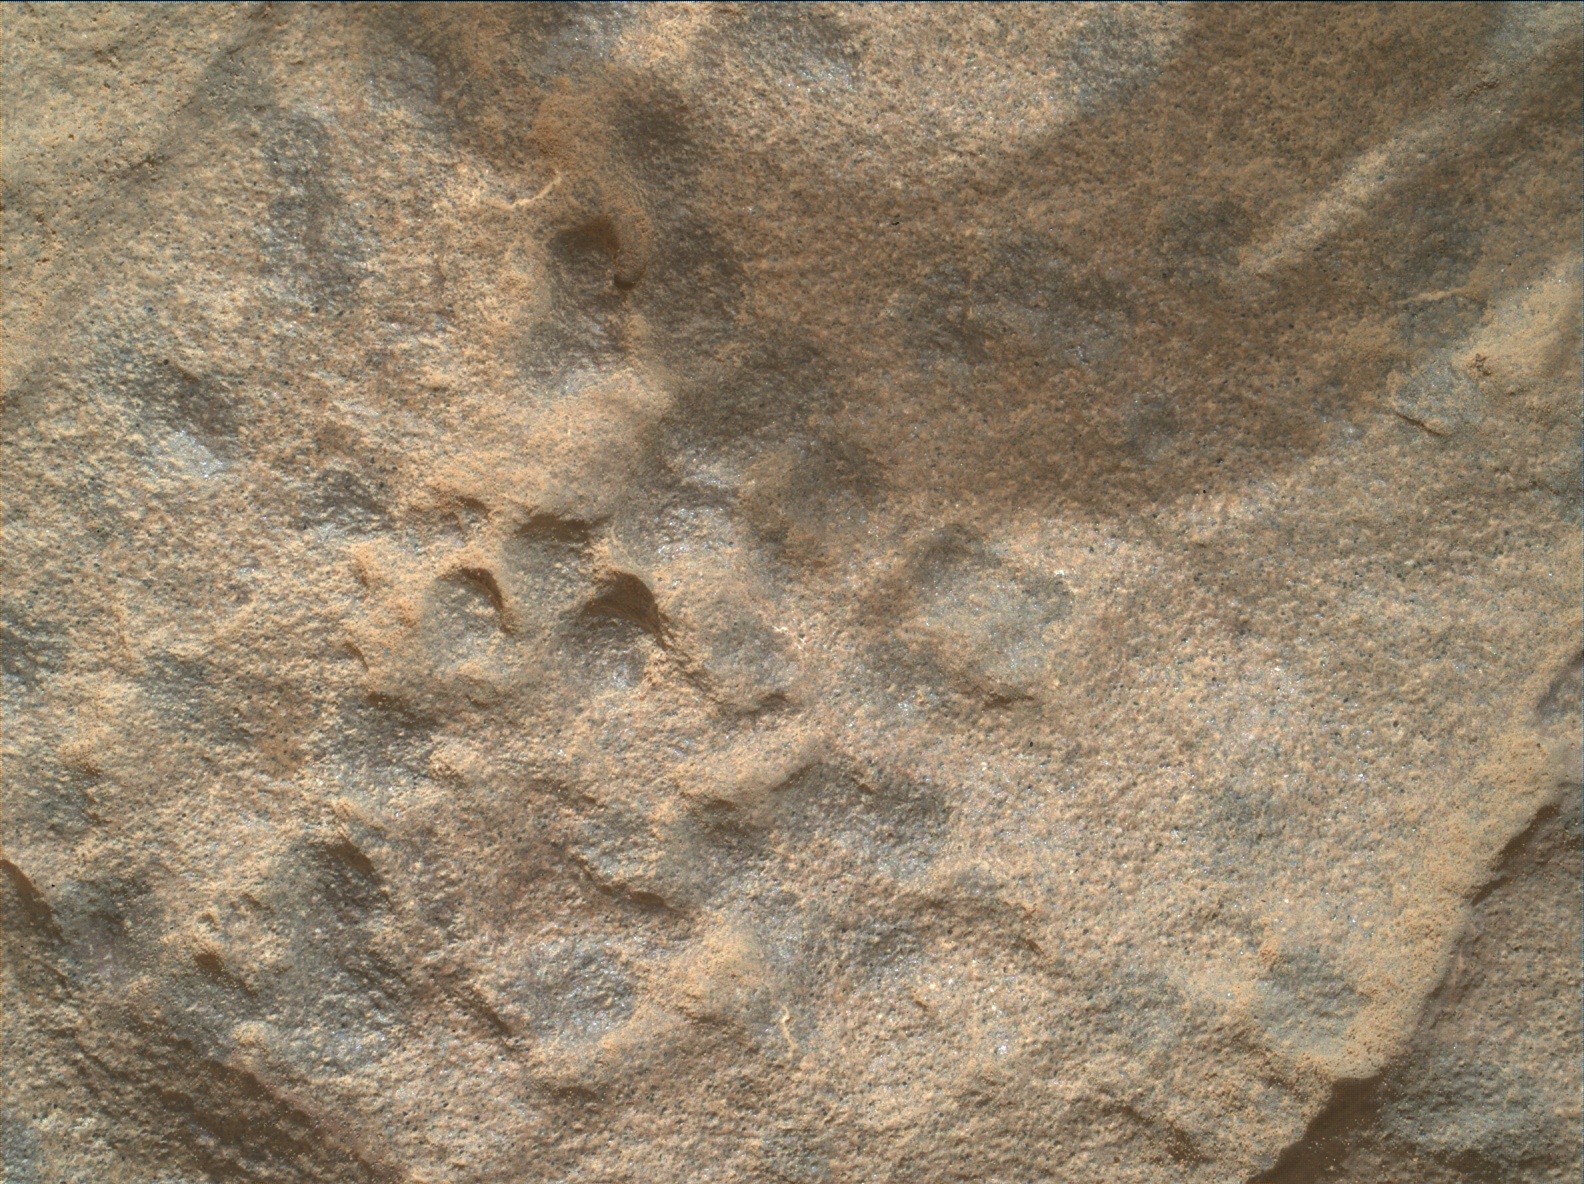 Nasa's Mars rover Curiosity acquired this image using its Mars Hand Lens Imager (MAHLI) on Sol 1716